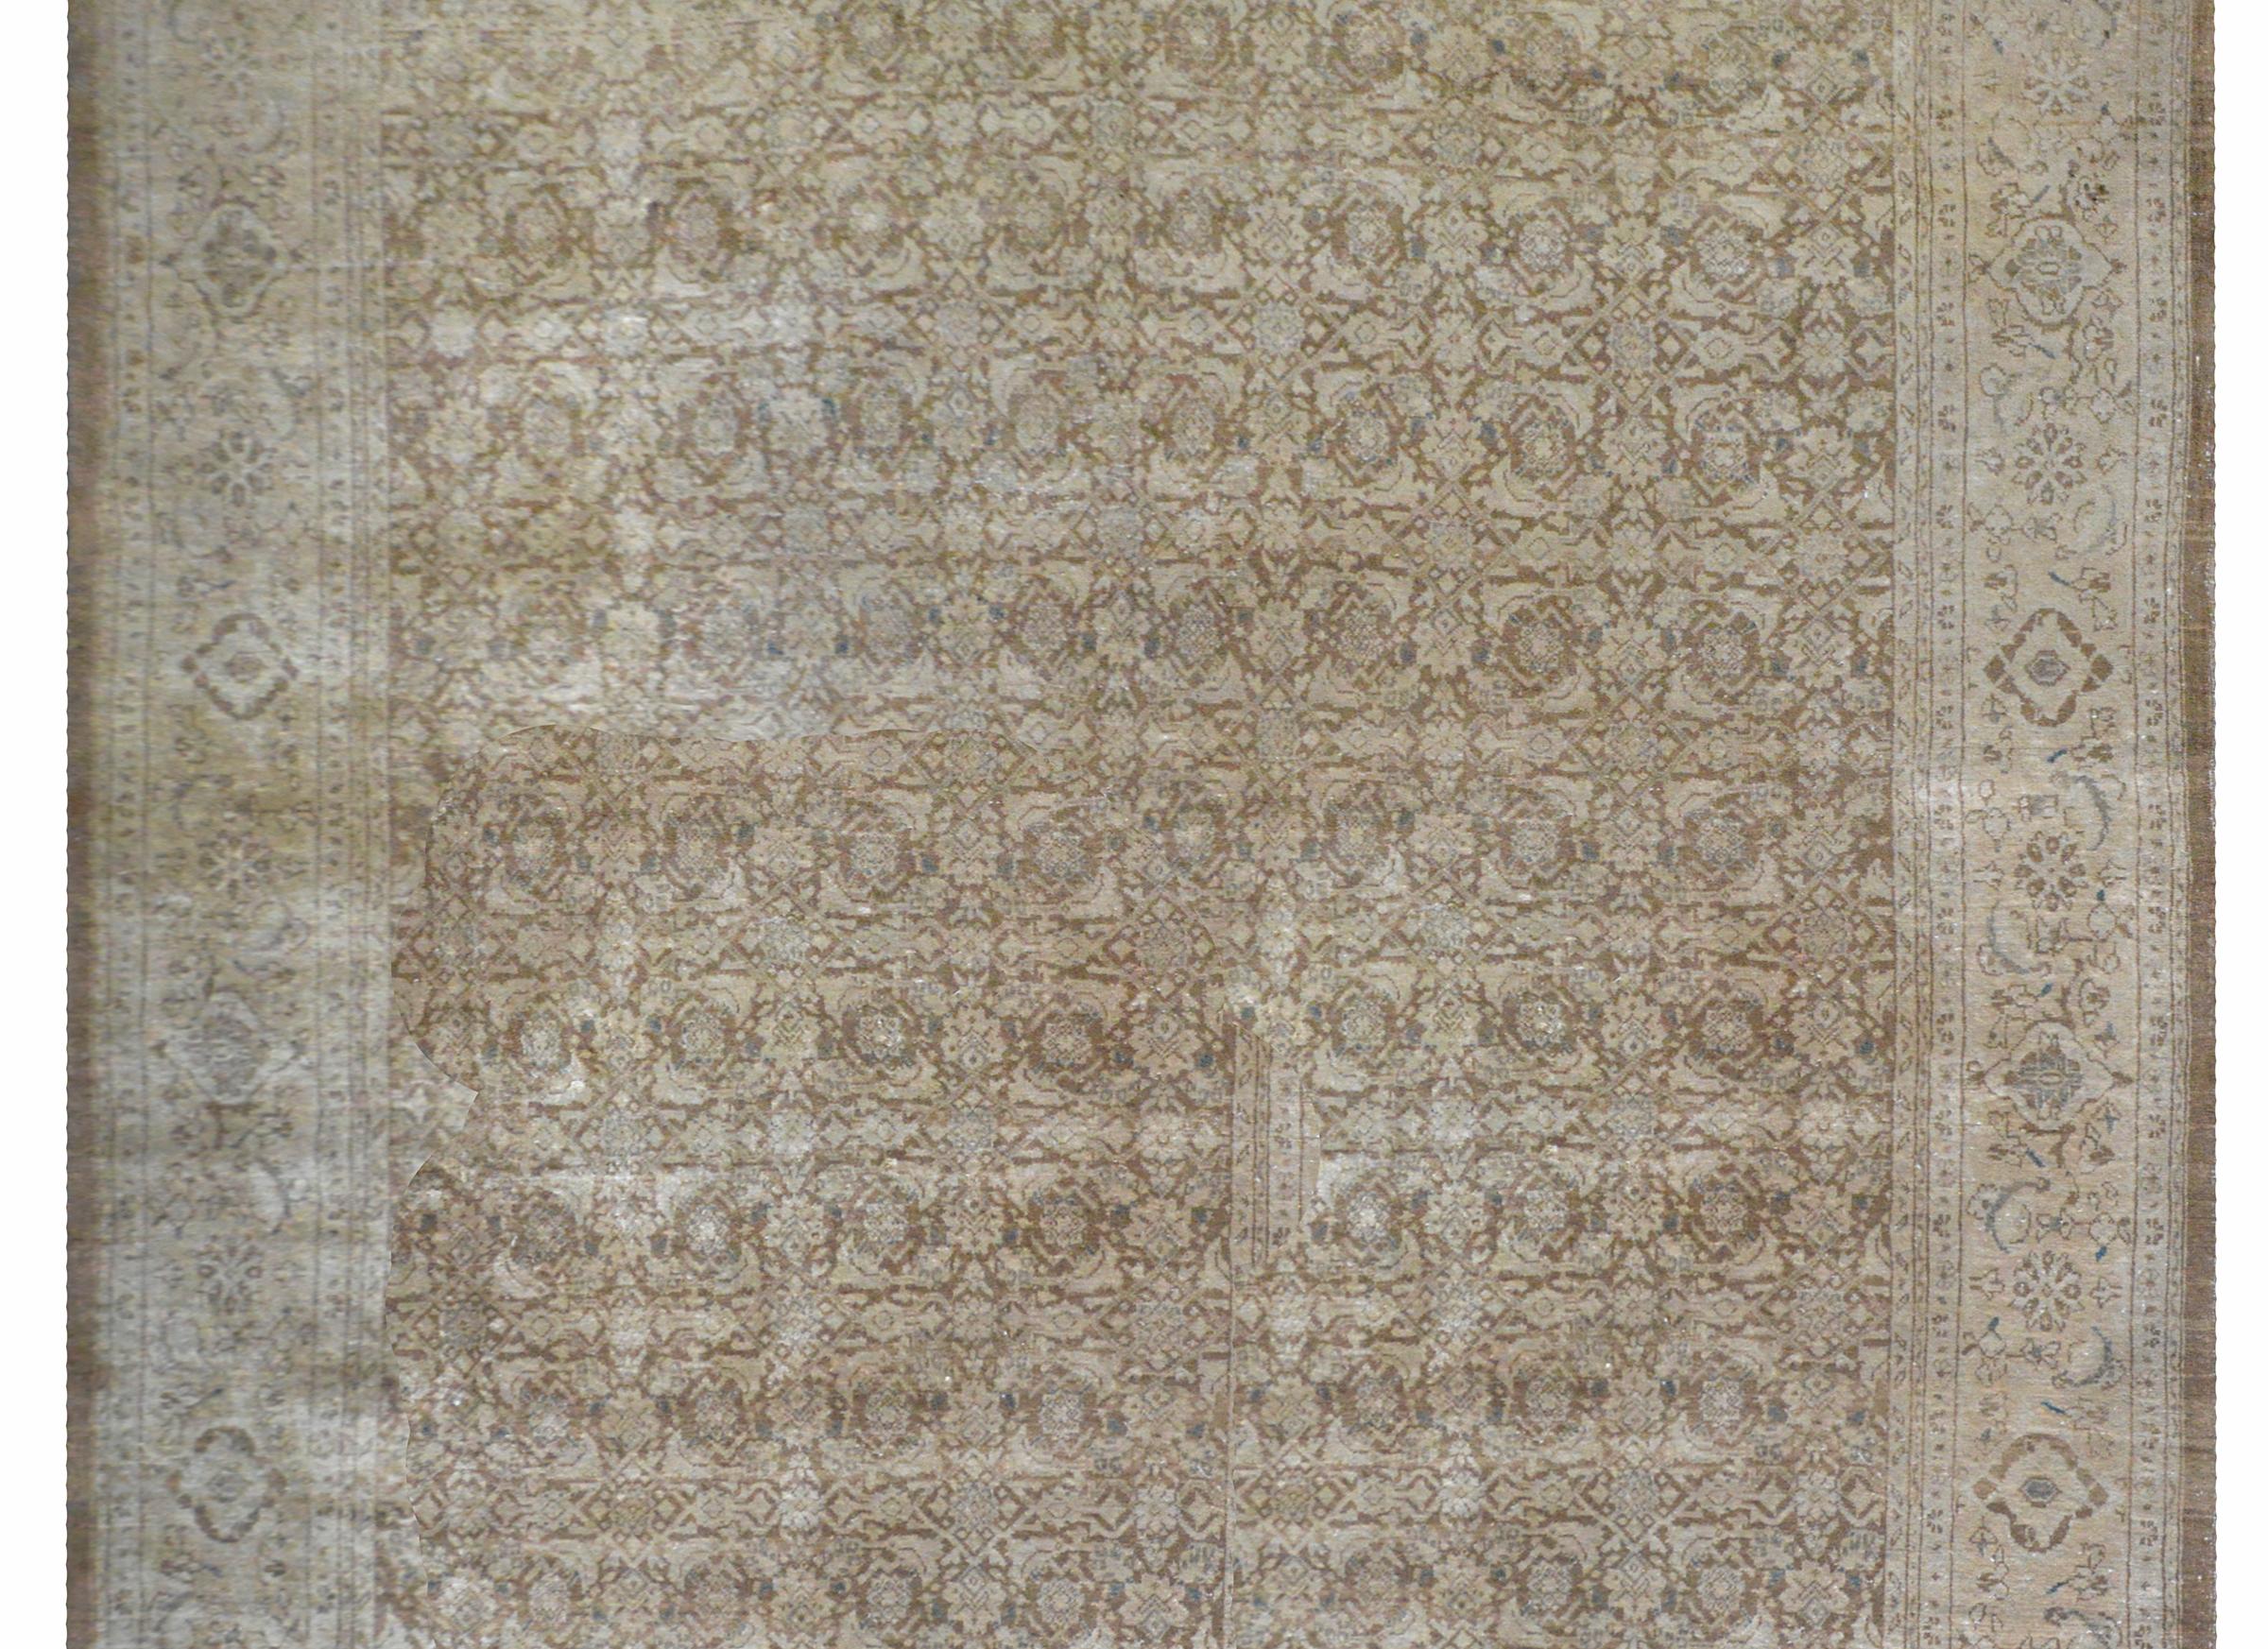 A beautiful vintage Persian Tabriz rug with an all-over trellis floral and leaf pattern surrounded by a wide large-scale floral patterned border. This rug has been given an antiqued wash to fade the colors.